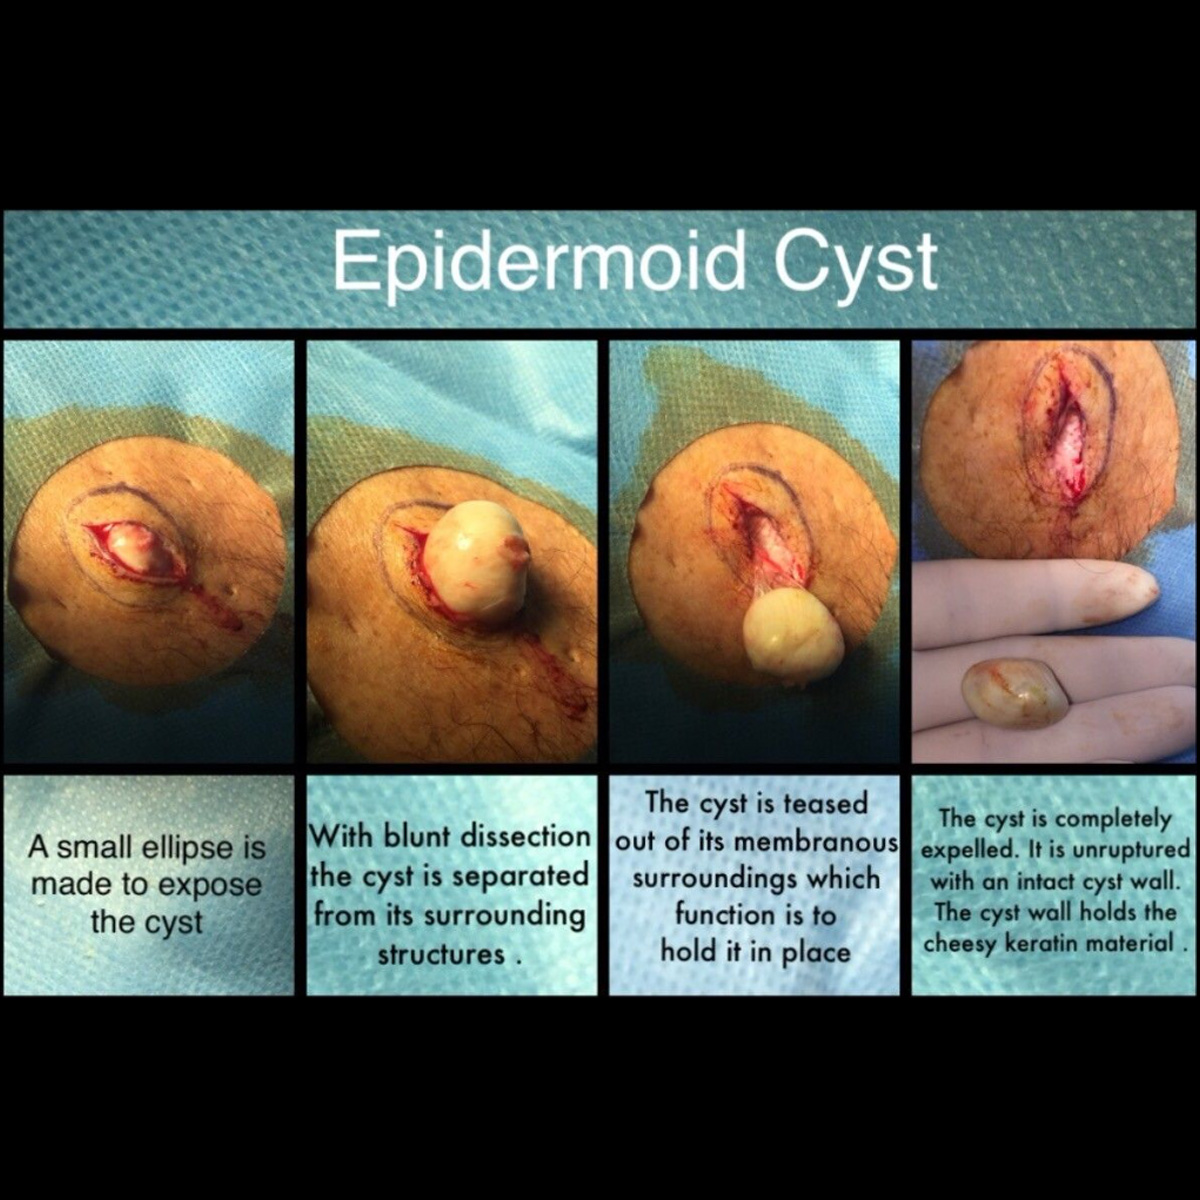 4-image diagram showing the removal of a epidermoid cyst